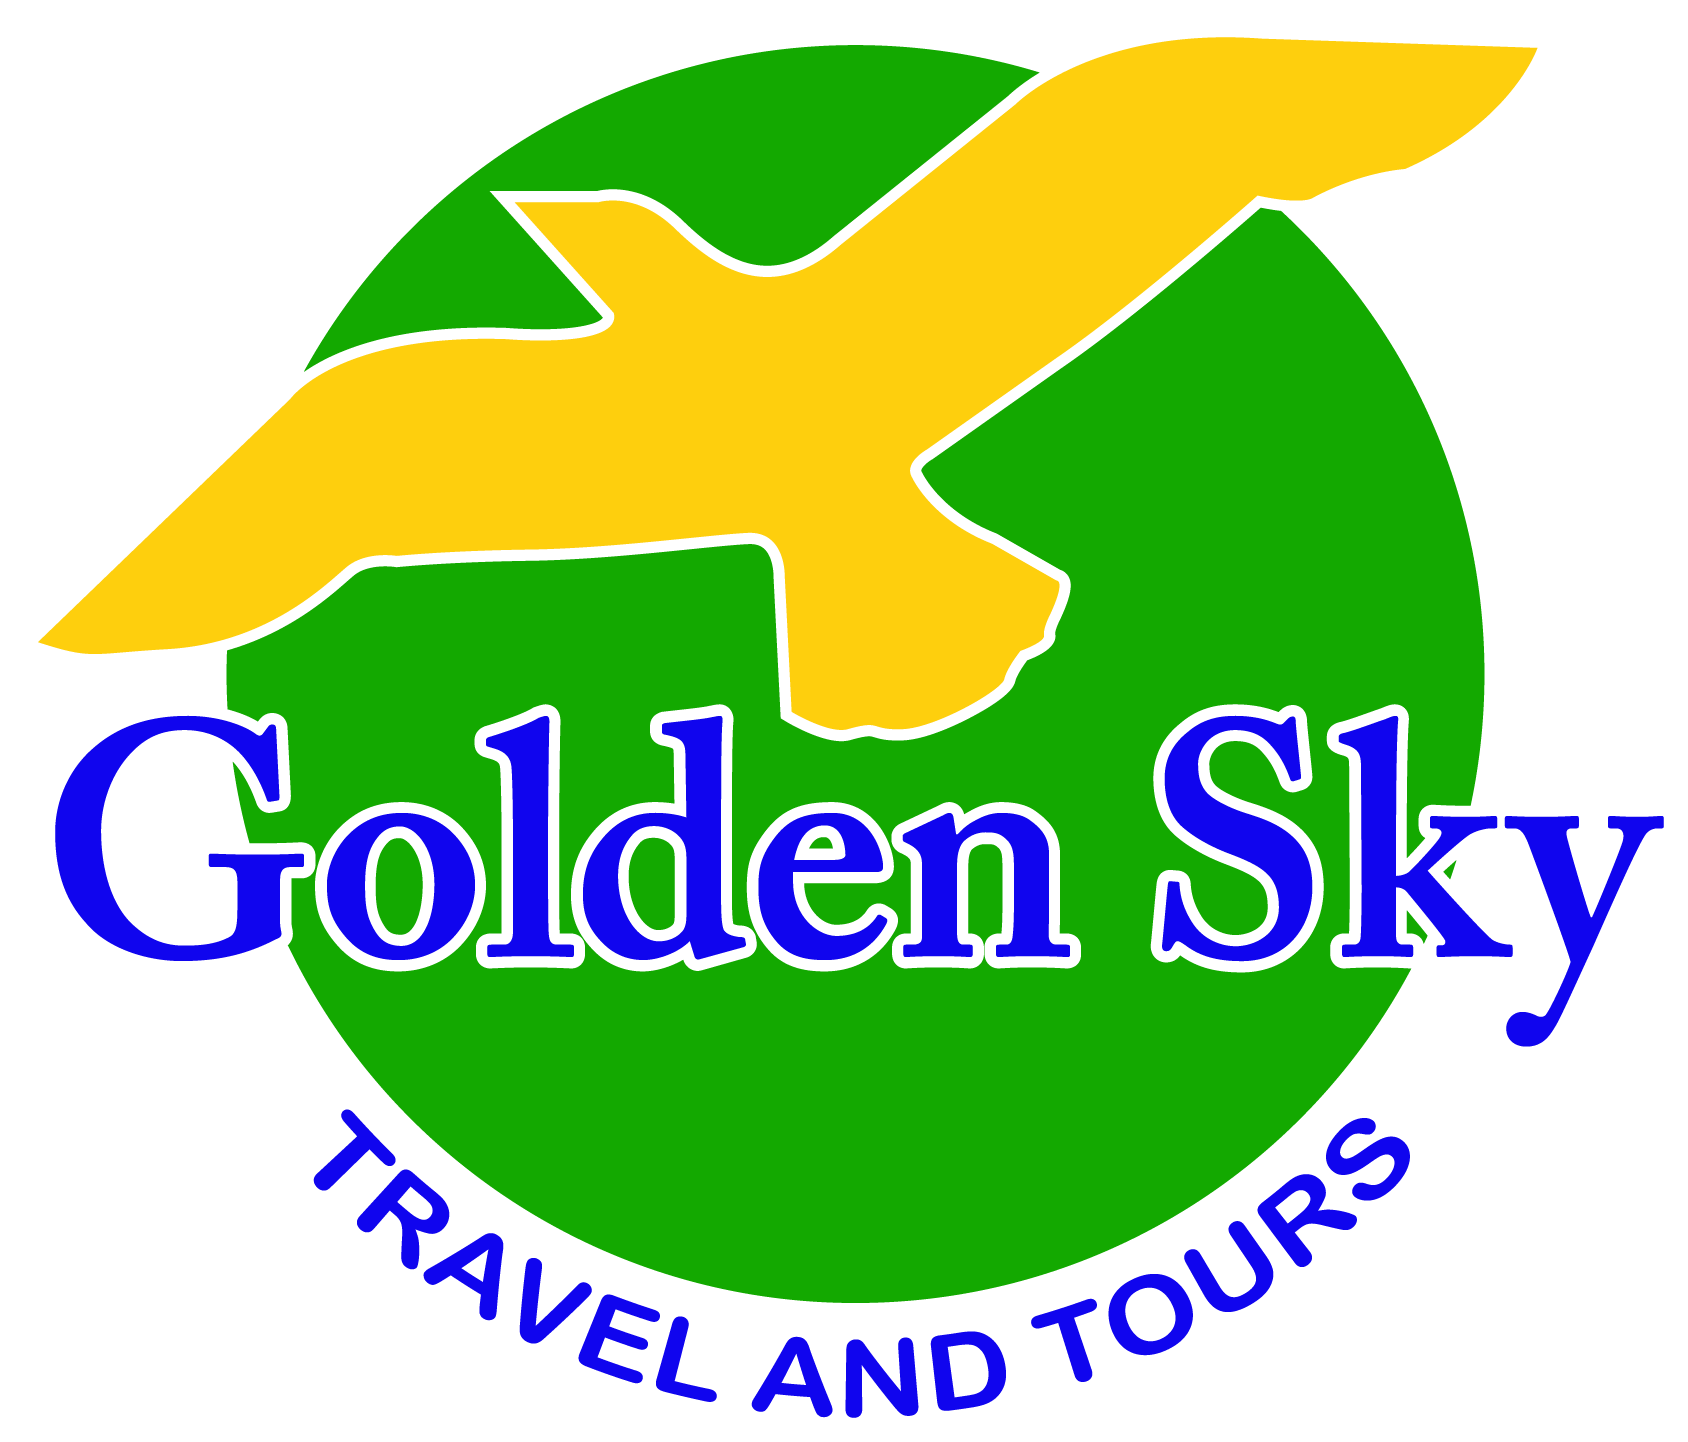 golden sky travel and tours